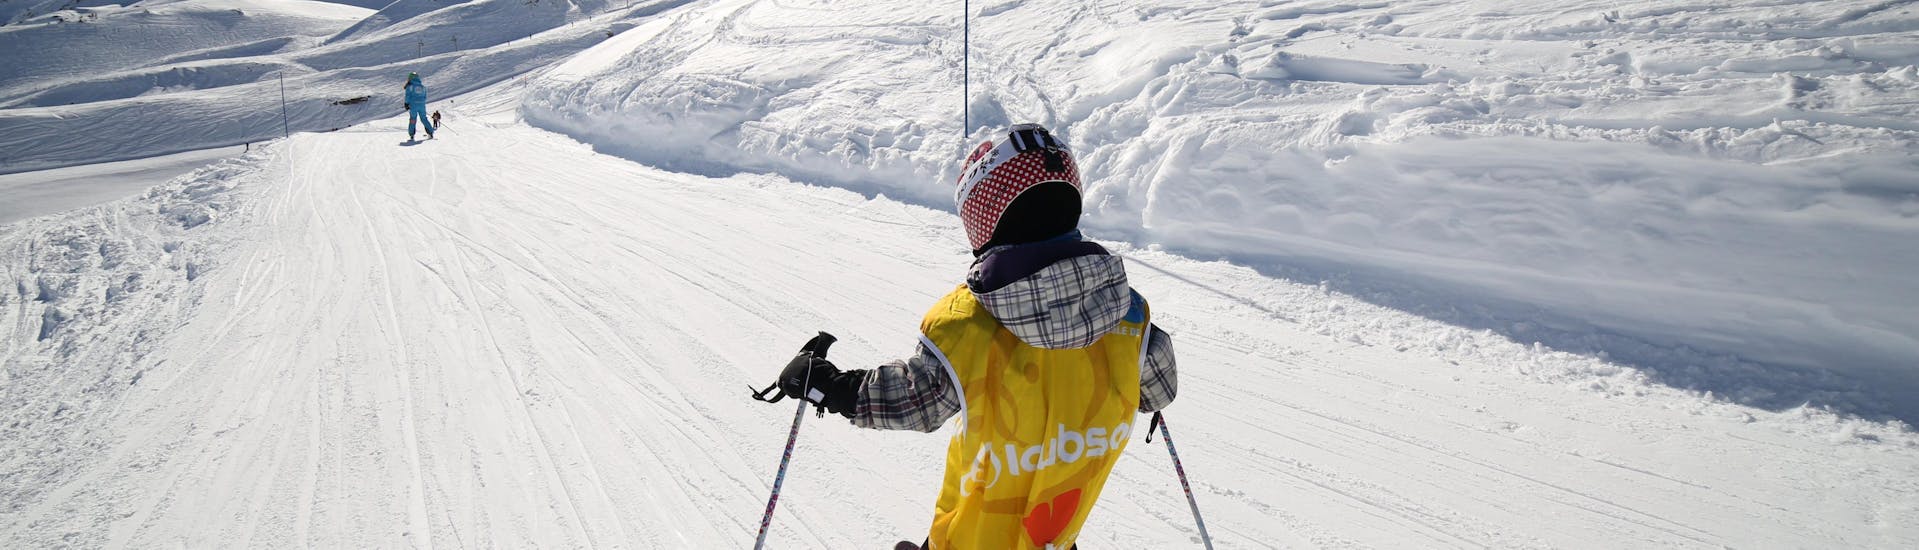 A youg skier is skiing down a snowy slope during his Kids Ski Lessons (3-6 years) - Low Season - All Levels with the ski school ESI Font Romeu.